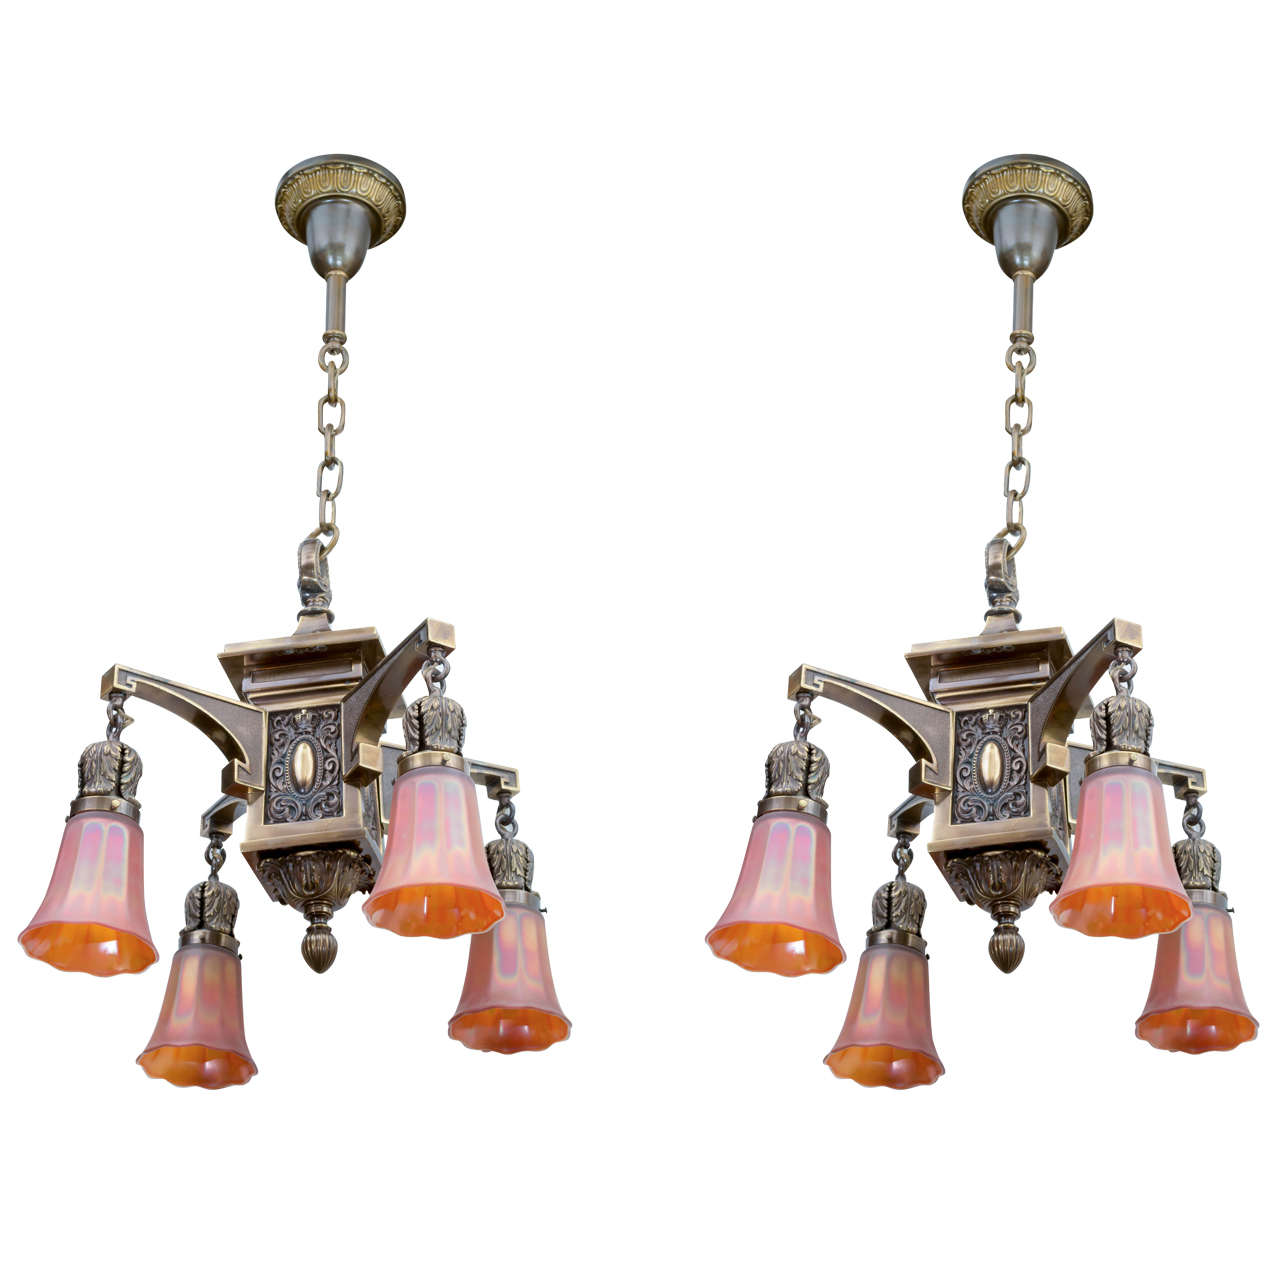 Exceptional Pair of Arts and Crafts Four-Arm Chandeliers